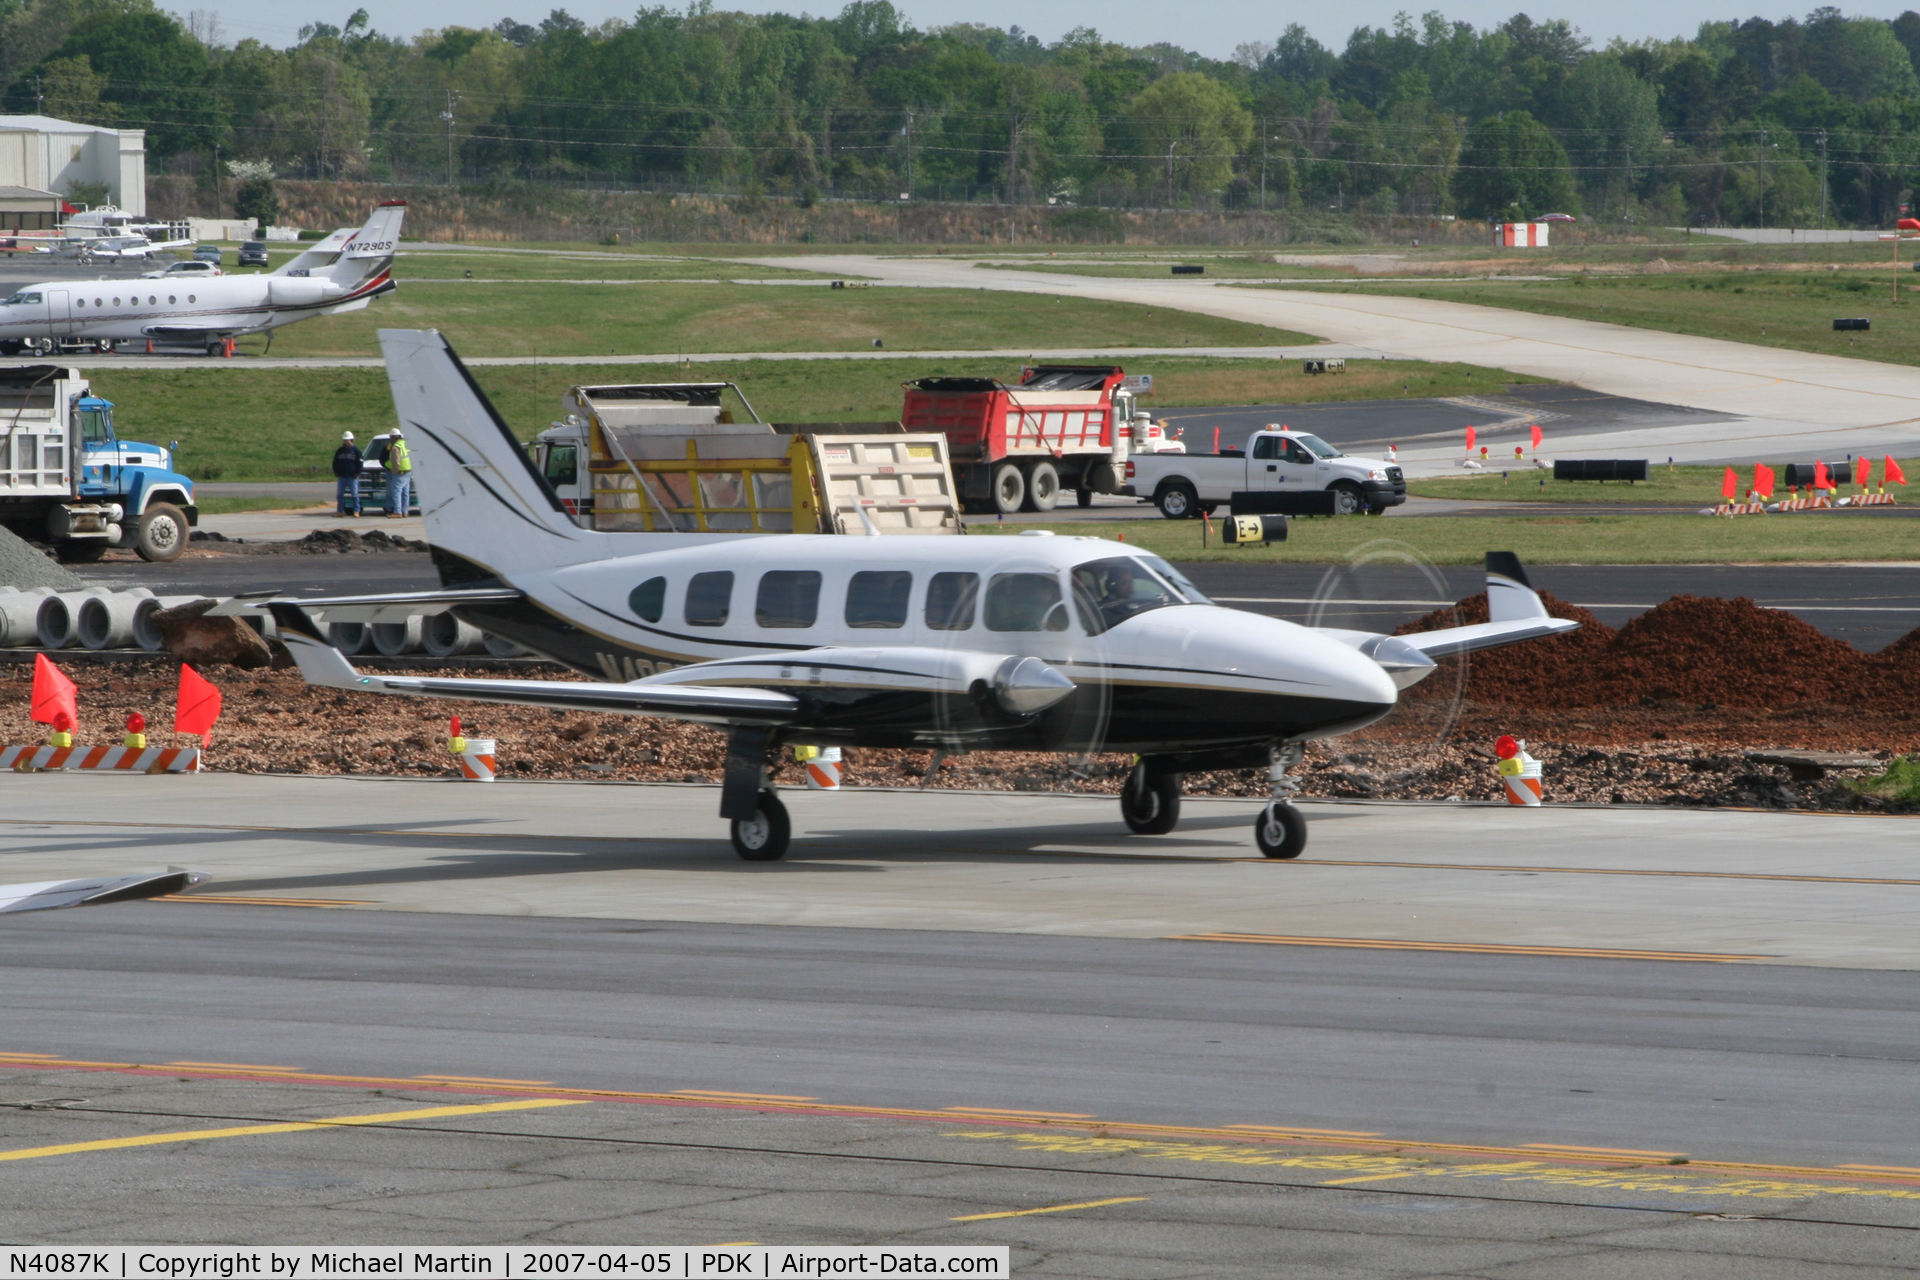 N4087K, 1981 Piper PA-31-350 Chieftain C/N 31-8152129, Taxing past on going construction